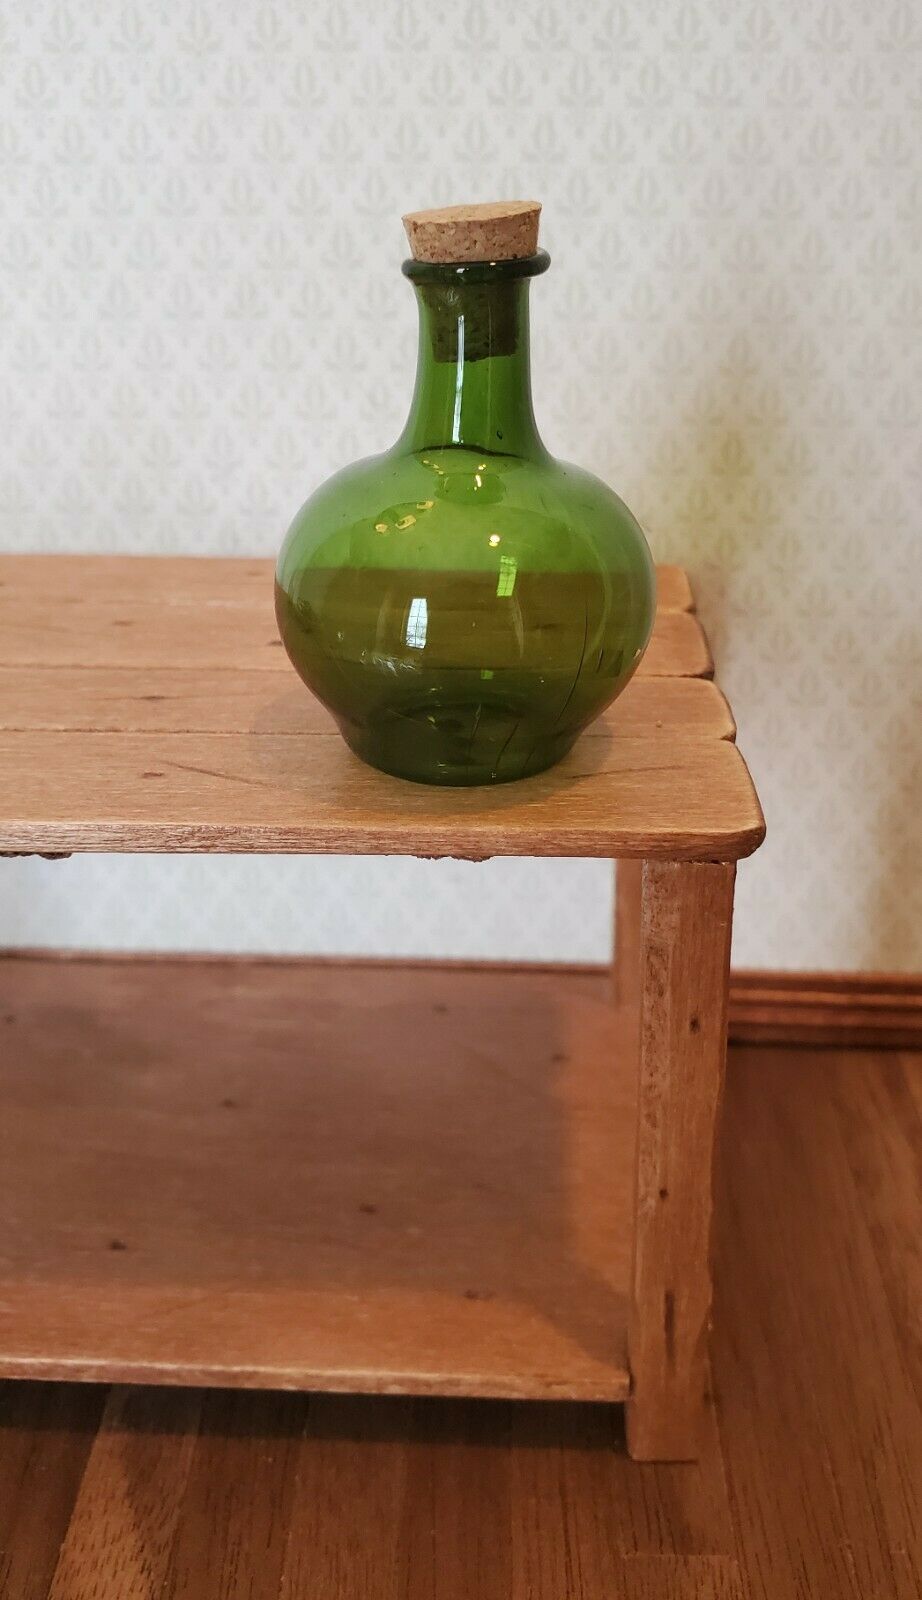 Dollhouse Miniature Carboy Or Demijohn Glass Bottle Green Cork Large 1:12 Scale